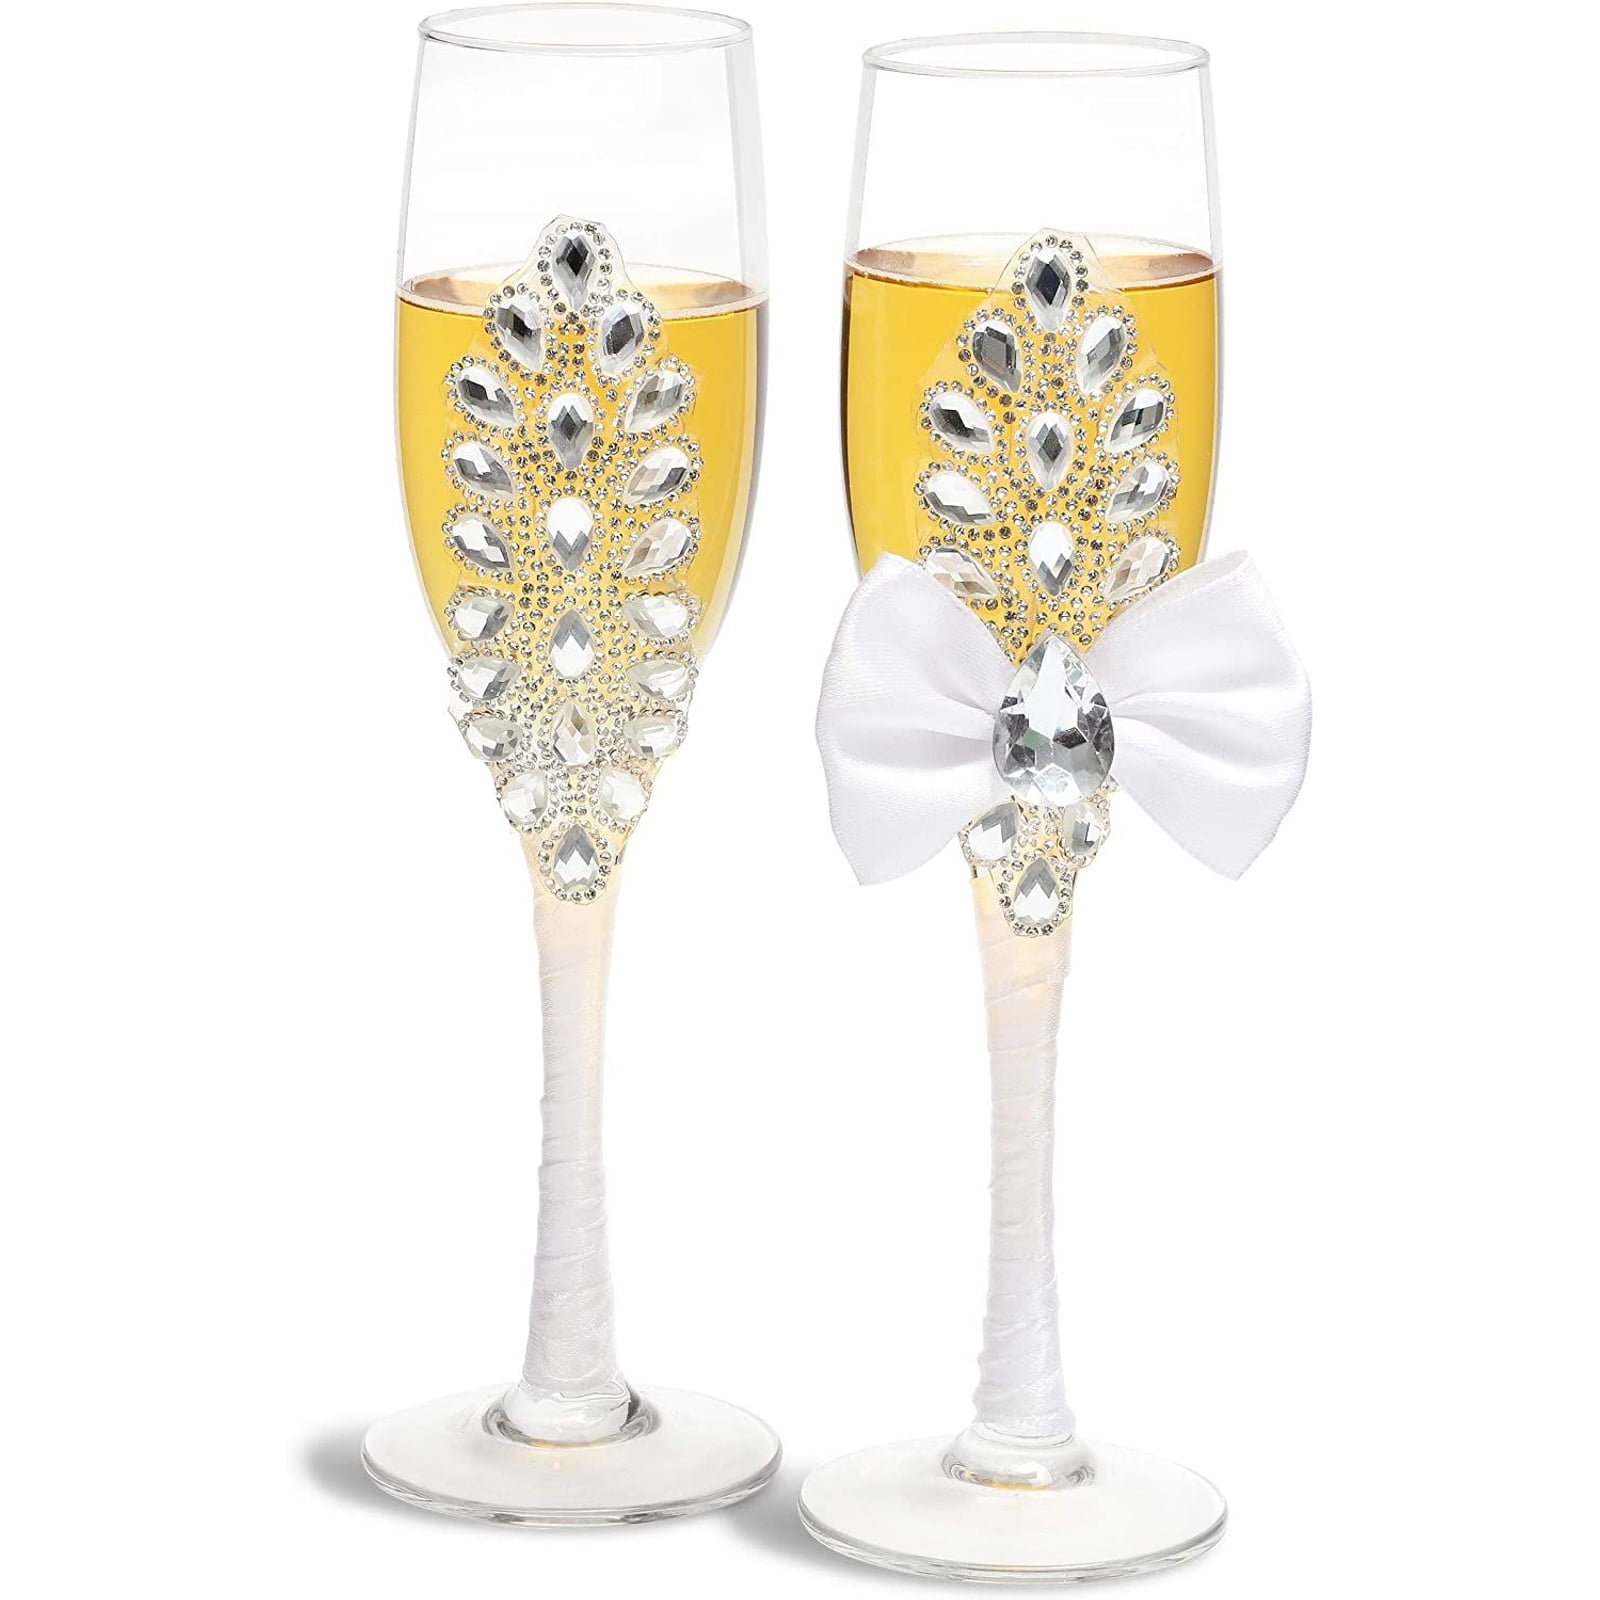 NewCouple wedding party wine glass bride groom tux bridal  toast gift,, 